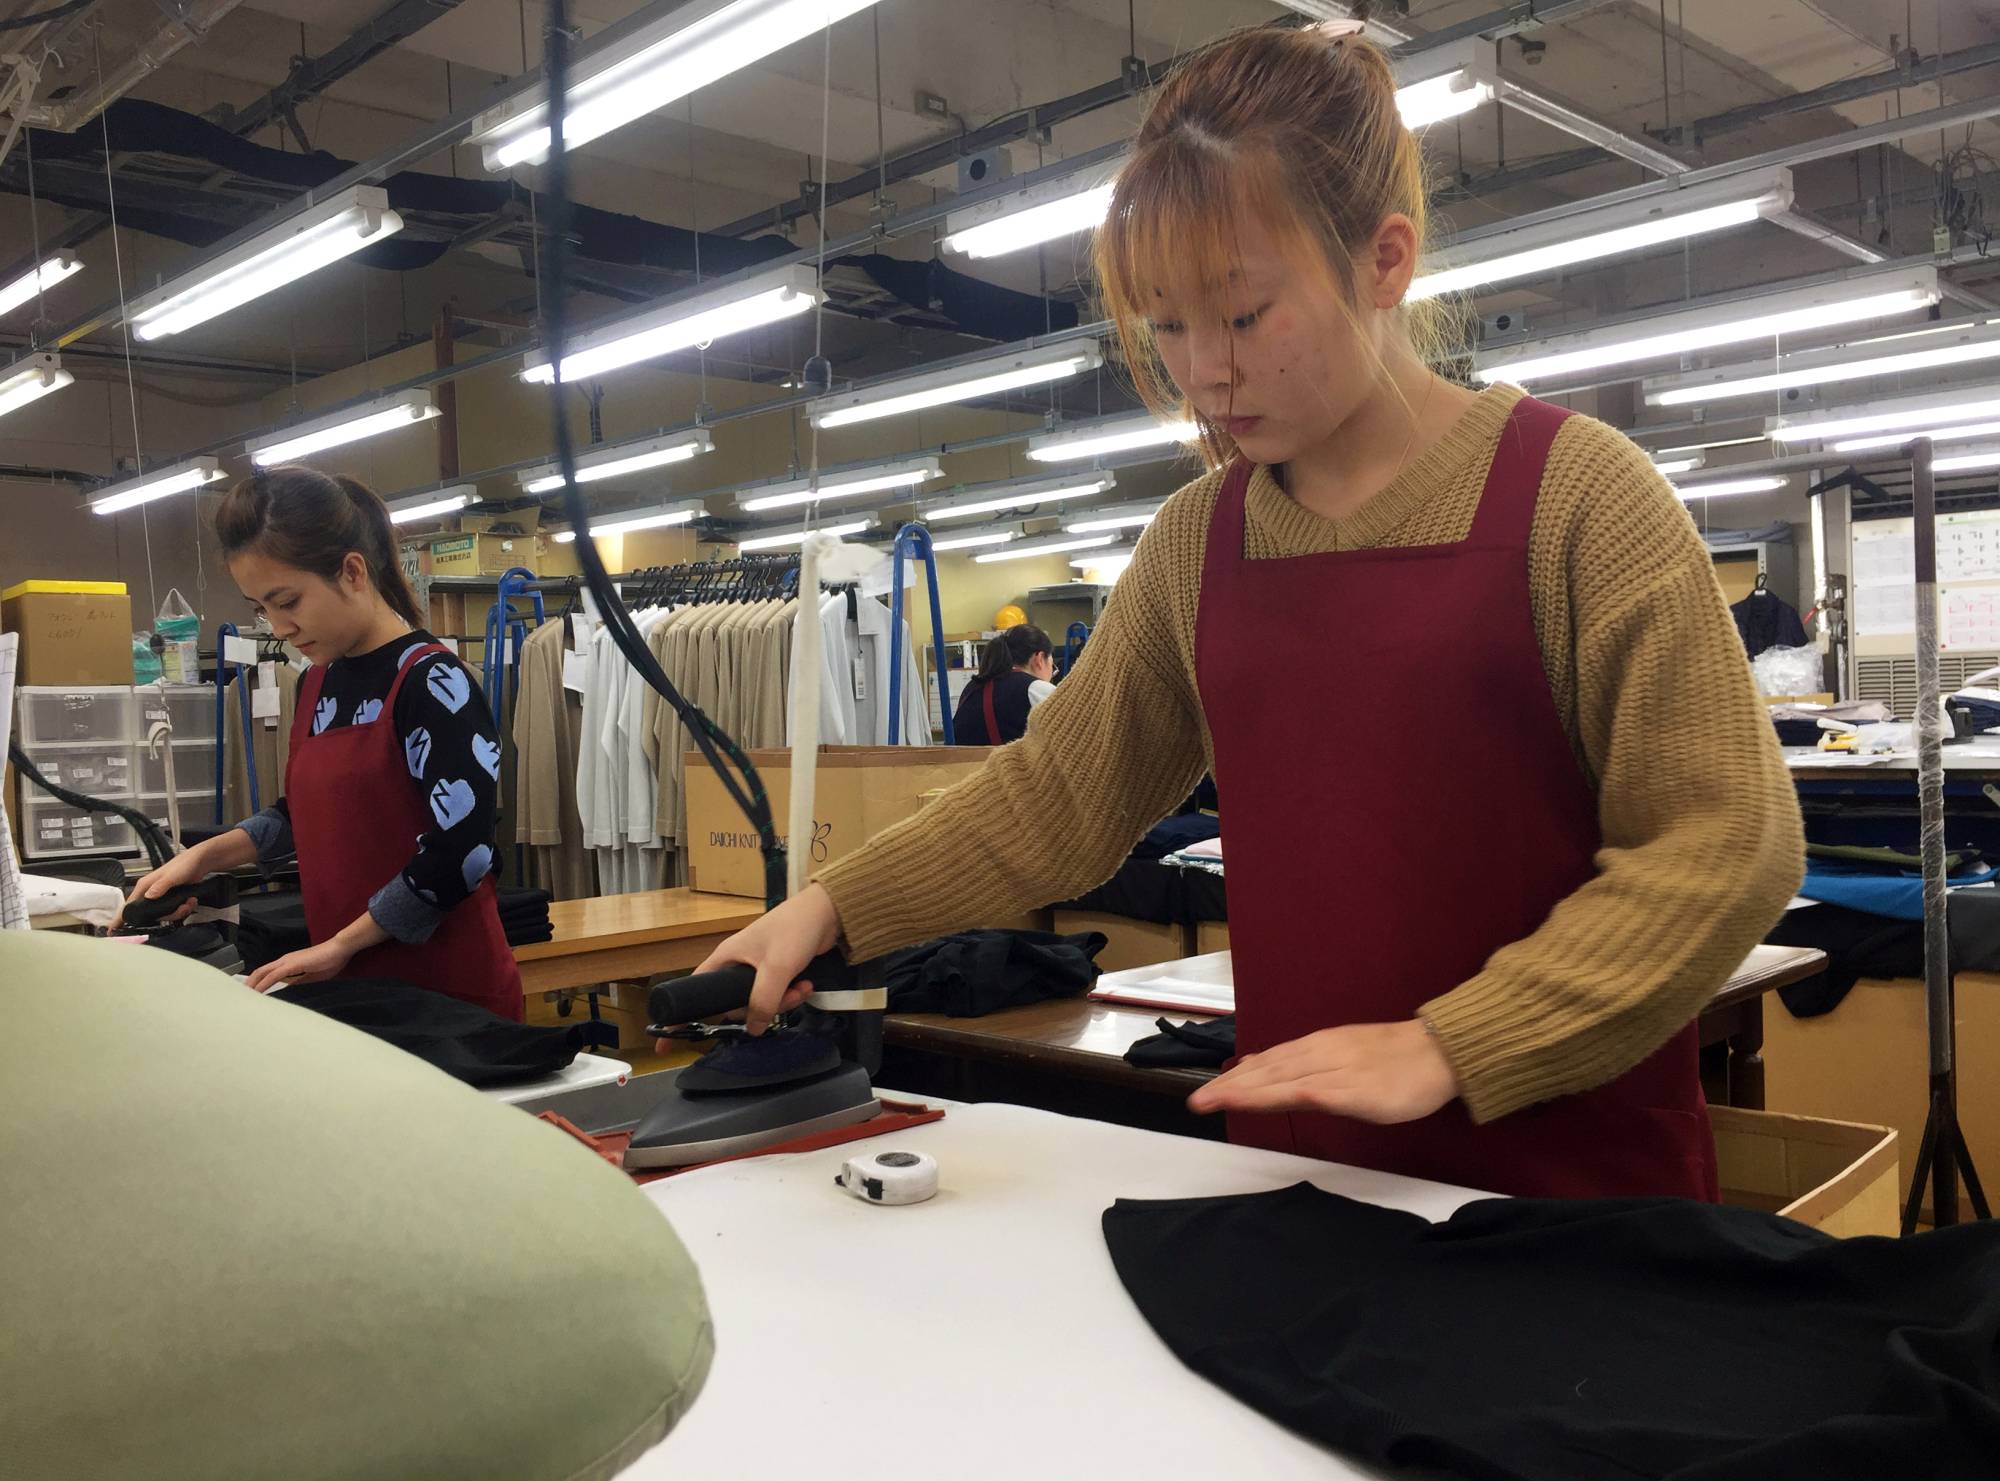 Technical trainees from Vietnam work at a knitwear factory in Mitsuke in 2019. Businesses in Japan have struggled to bring in new recruits from overseas since the country's borders were closed in response to COVID-19 in early 2020.  | REUTERS